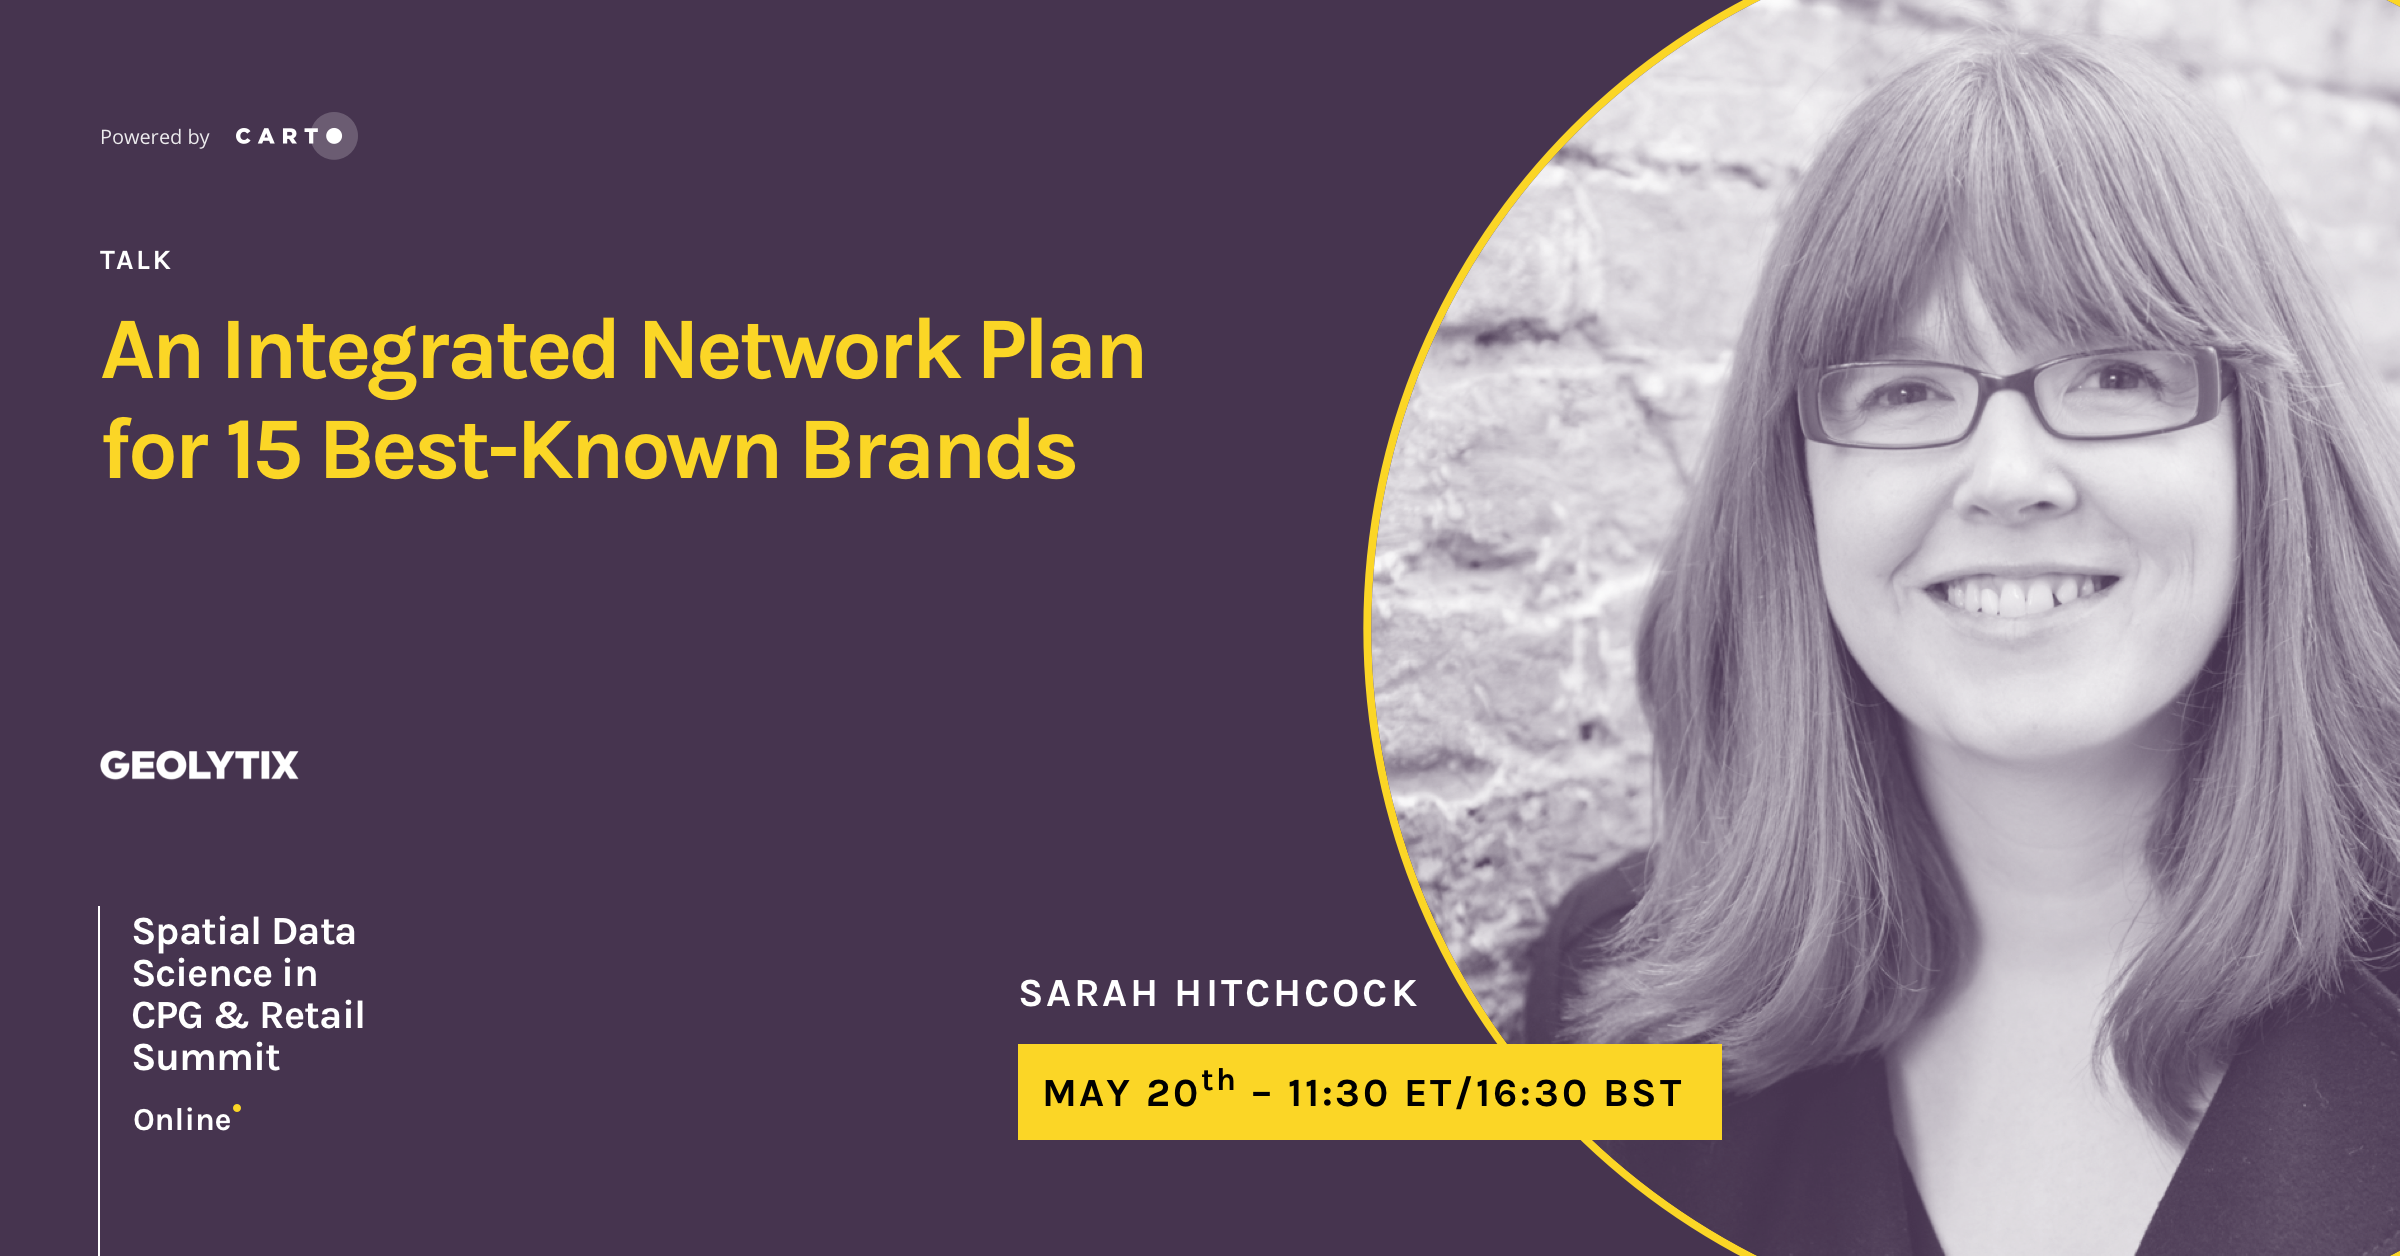 An Integrated Network Plan for 15 Best-Known Brands